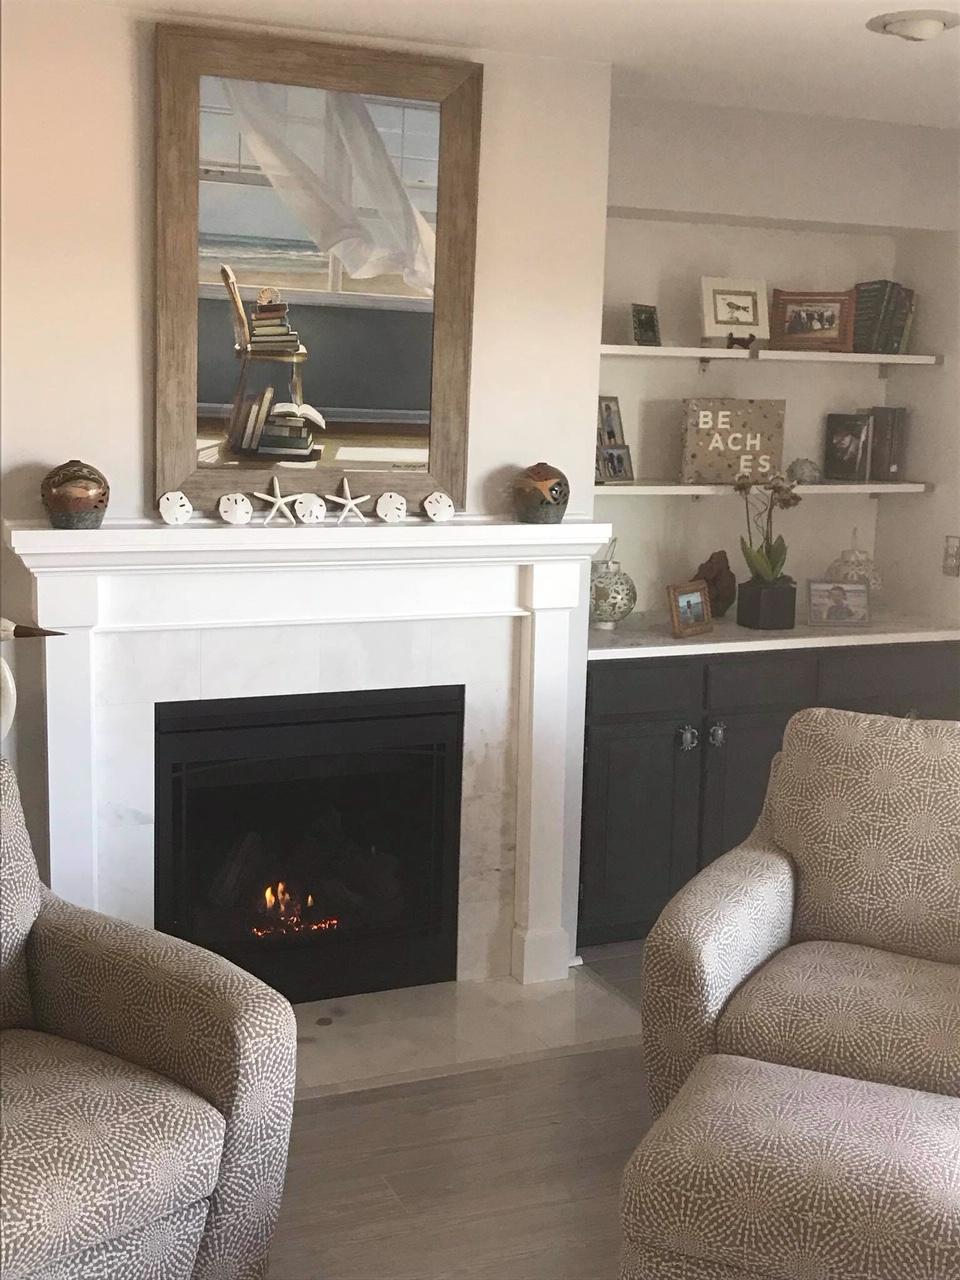 Repair Gas Fireplace Inspirational Gas Fireplace Services Moorestown Nj